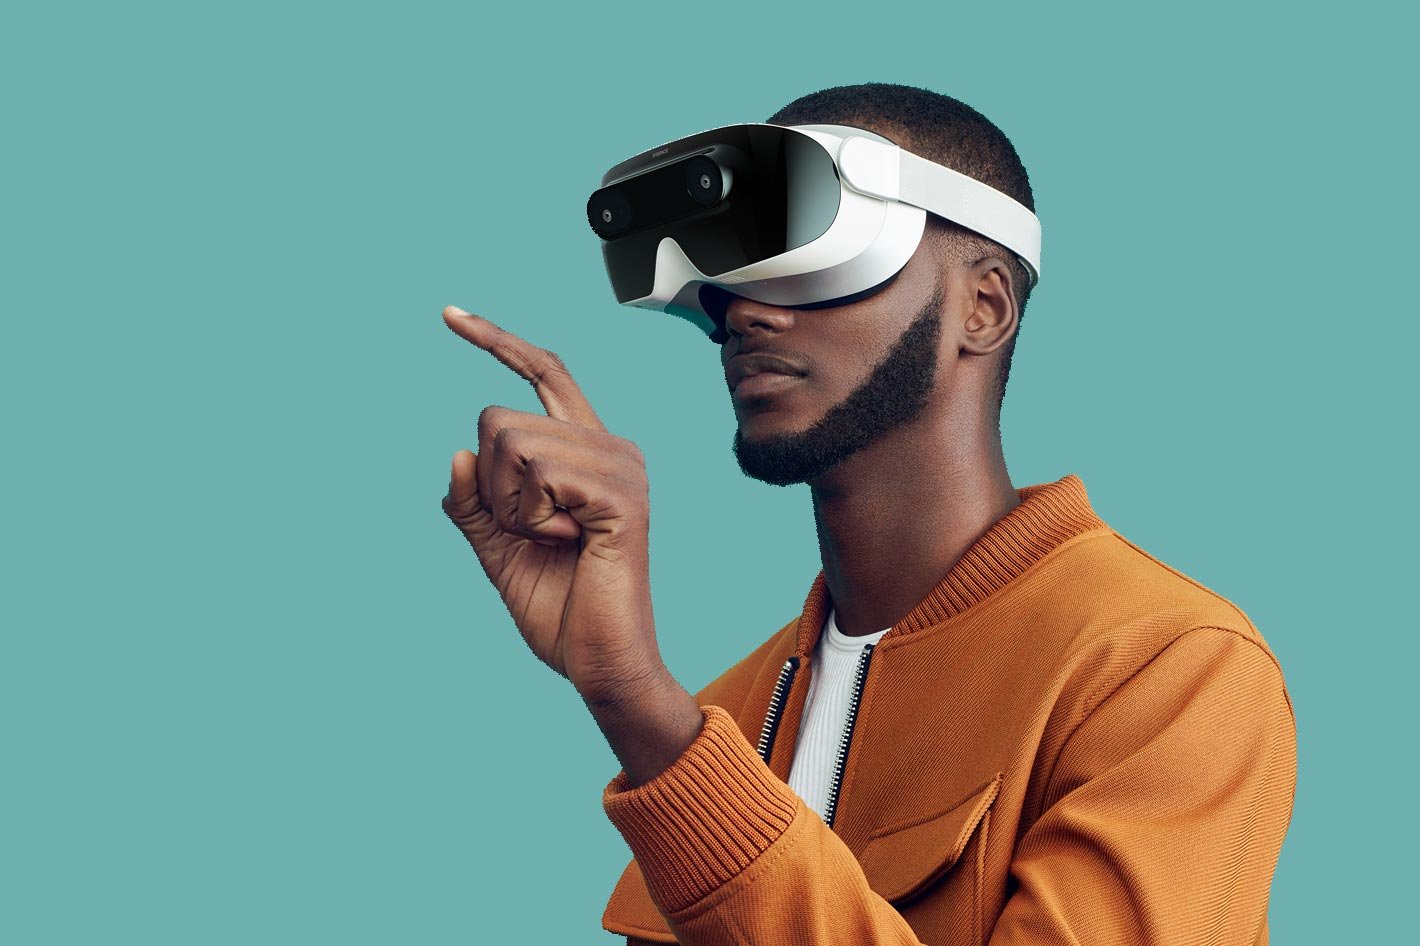 Are you excited about the Manova VR headset as well?